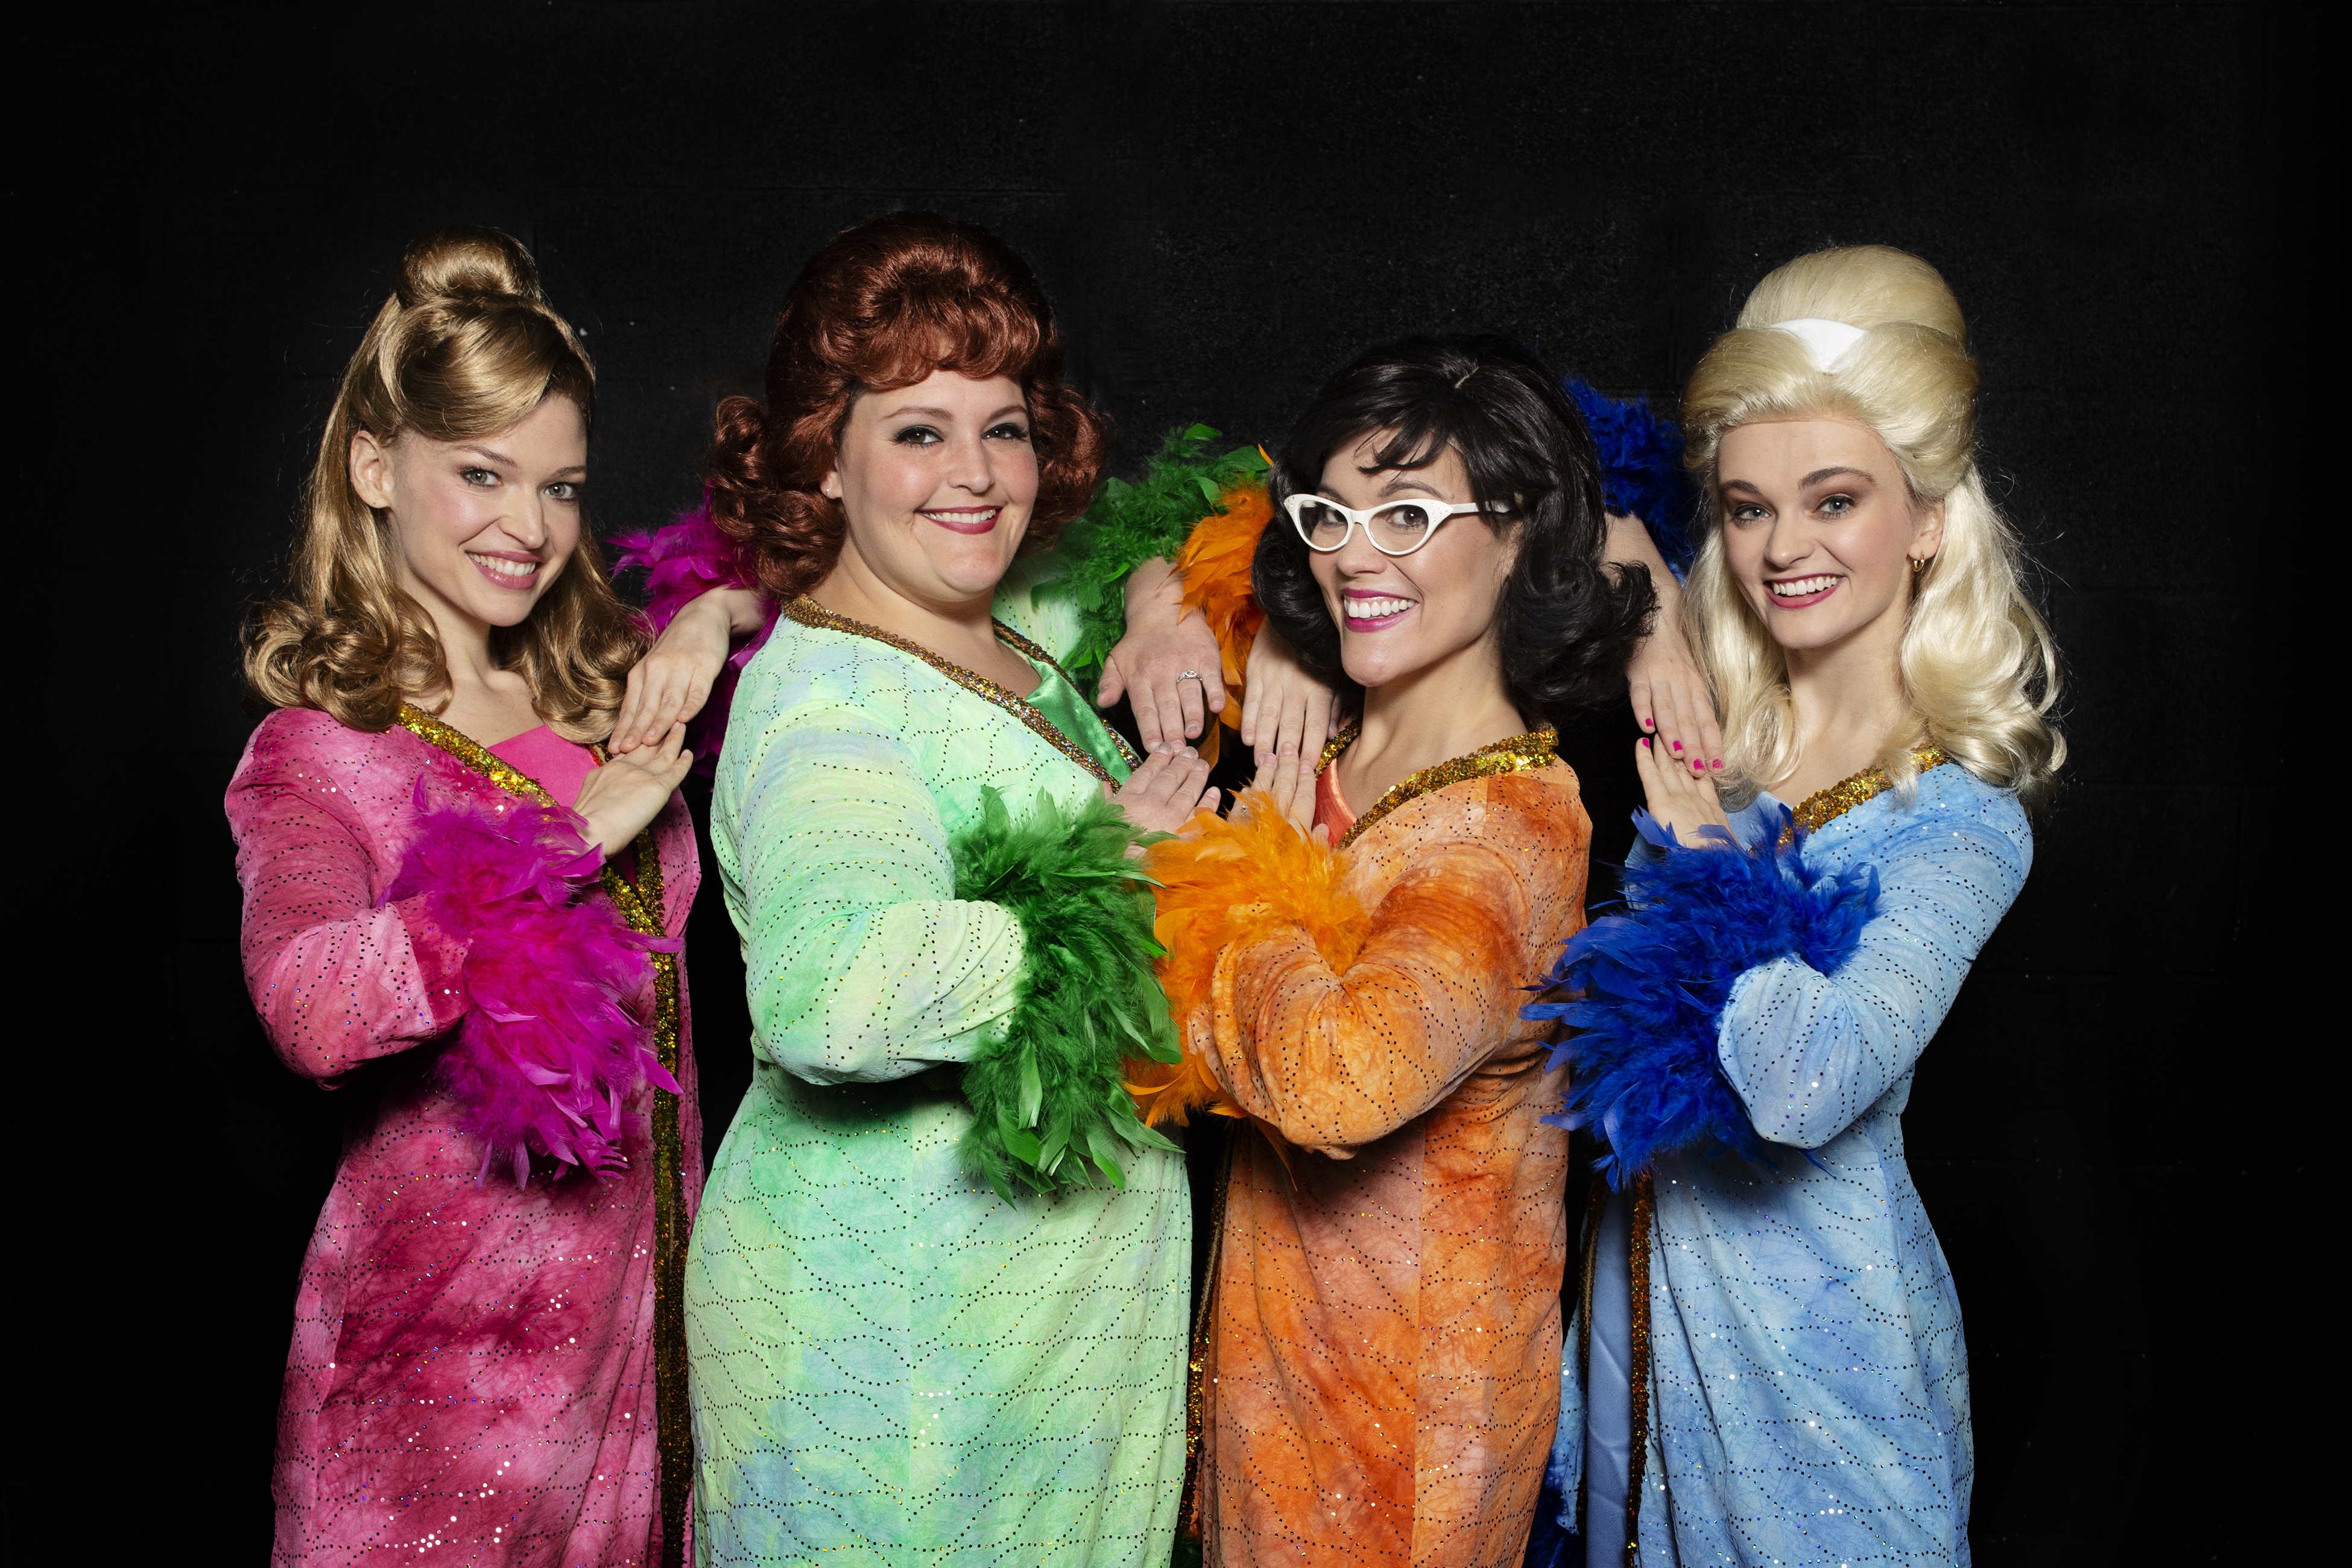 Review: Sit back and soak in the hits with ‘Marvelous Wonderettes’